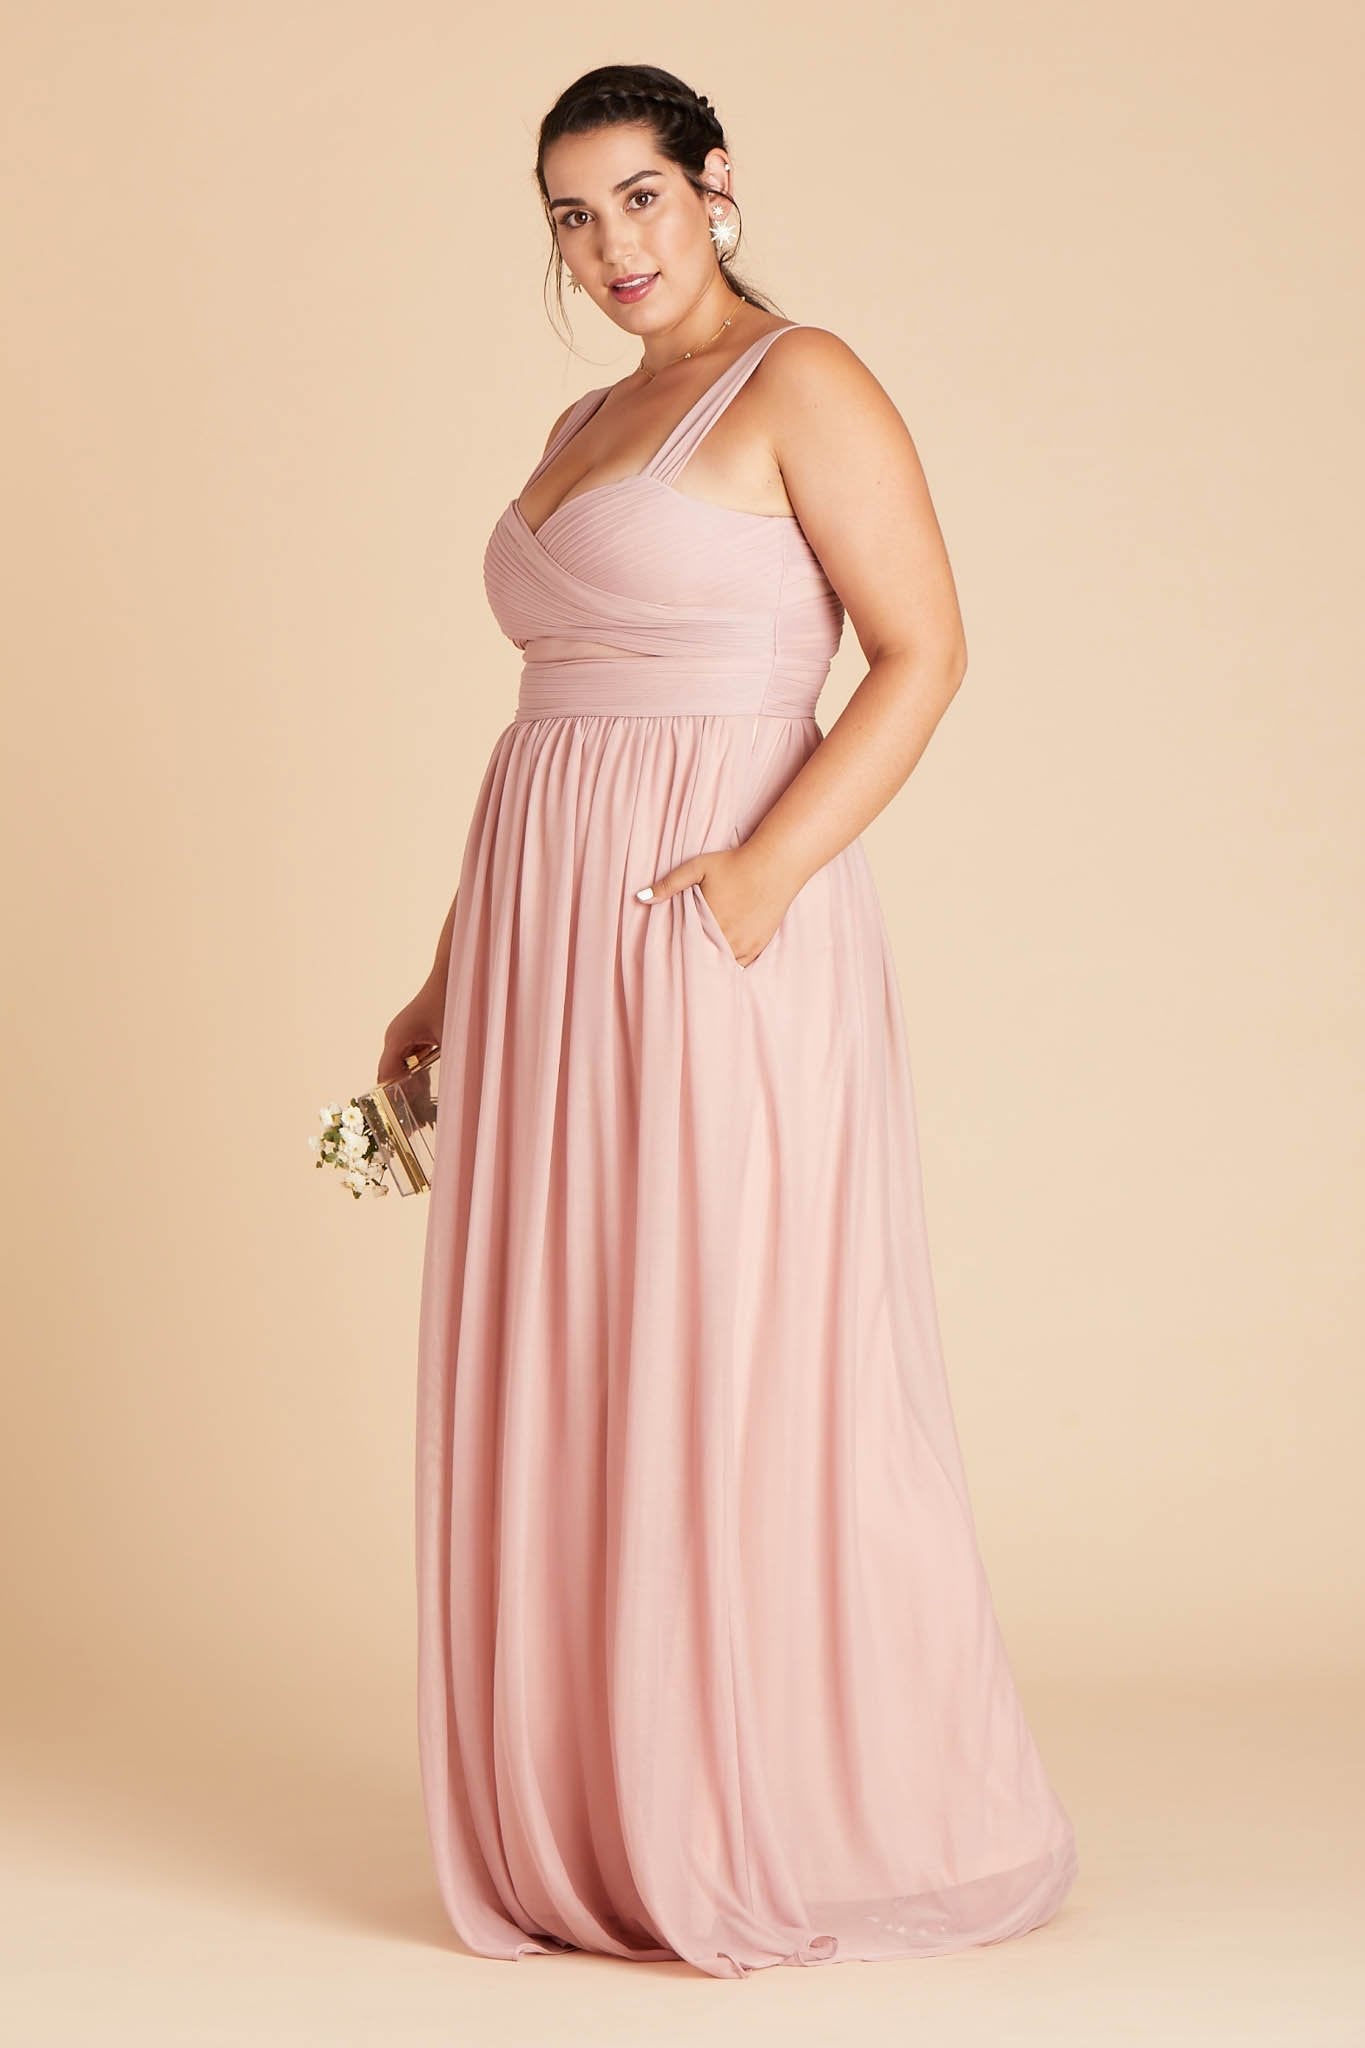 Front view of the Elsye Plus Size Bridesmaid Dress in dusty rose as the model rests her left hand in the hidden side pocket.